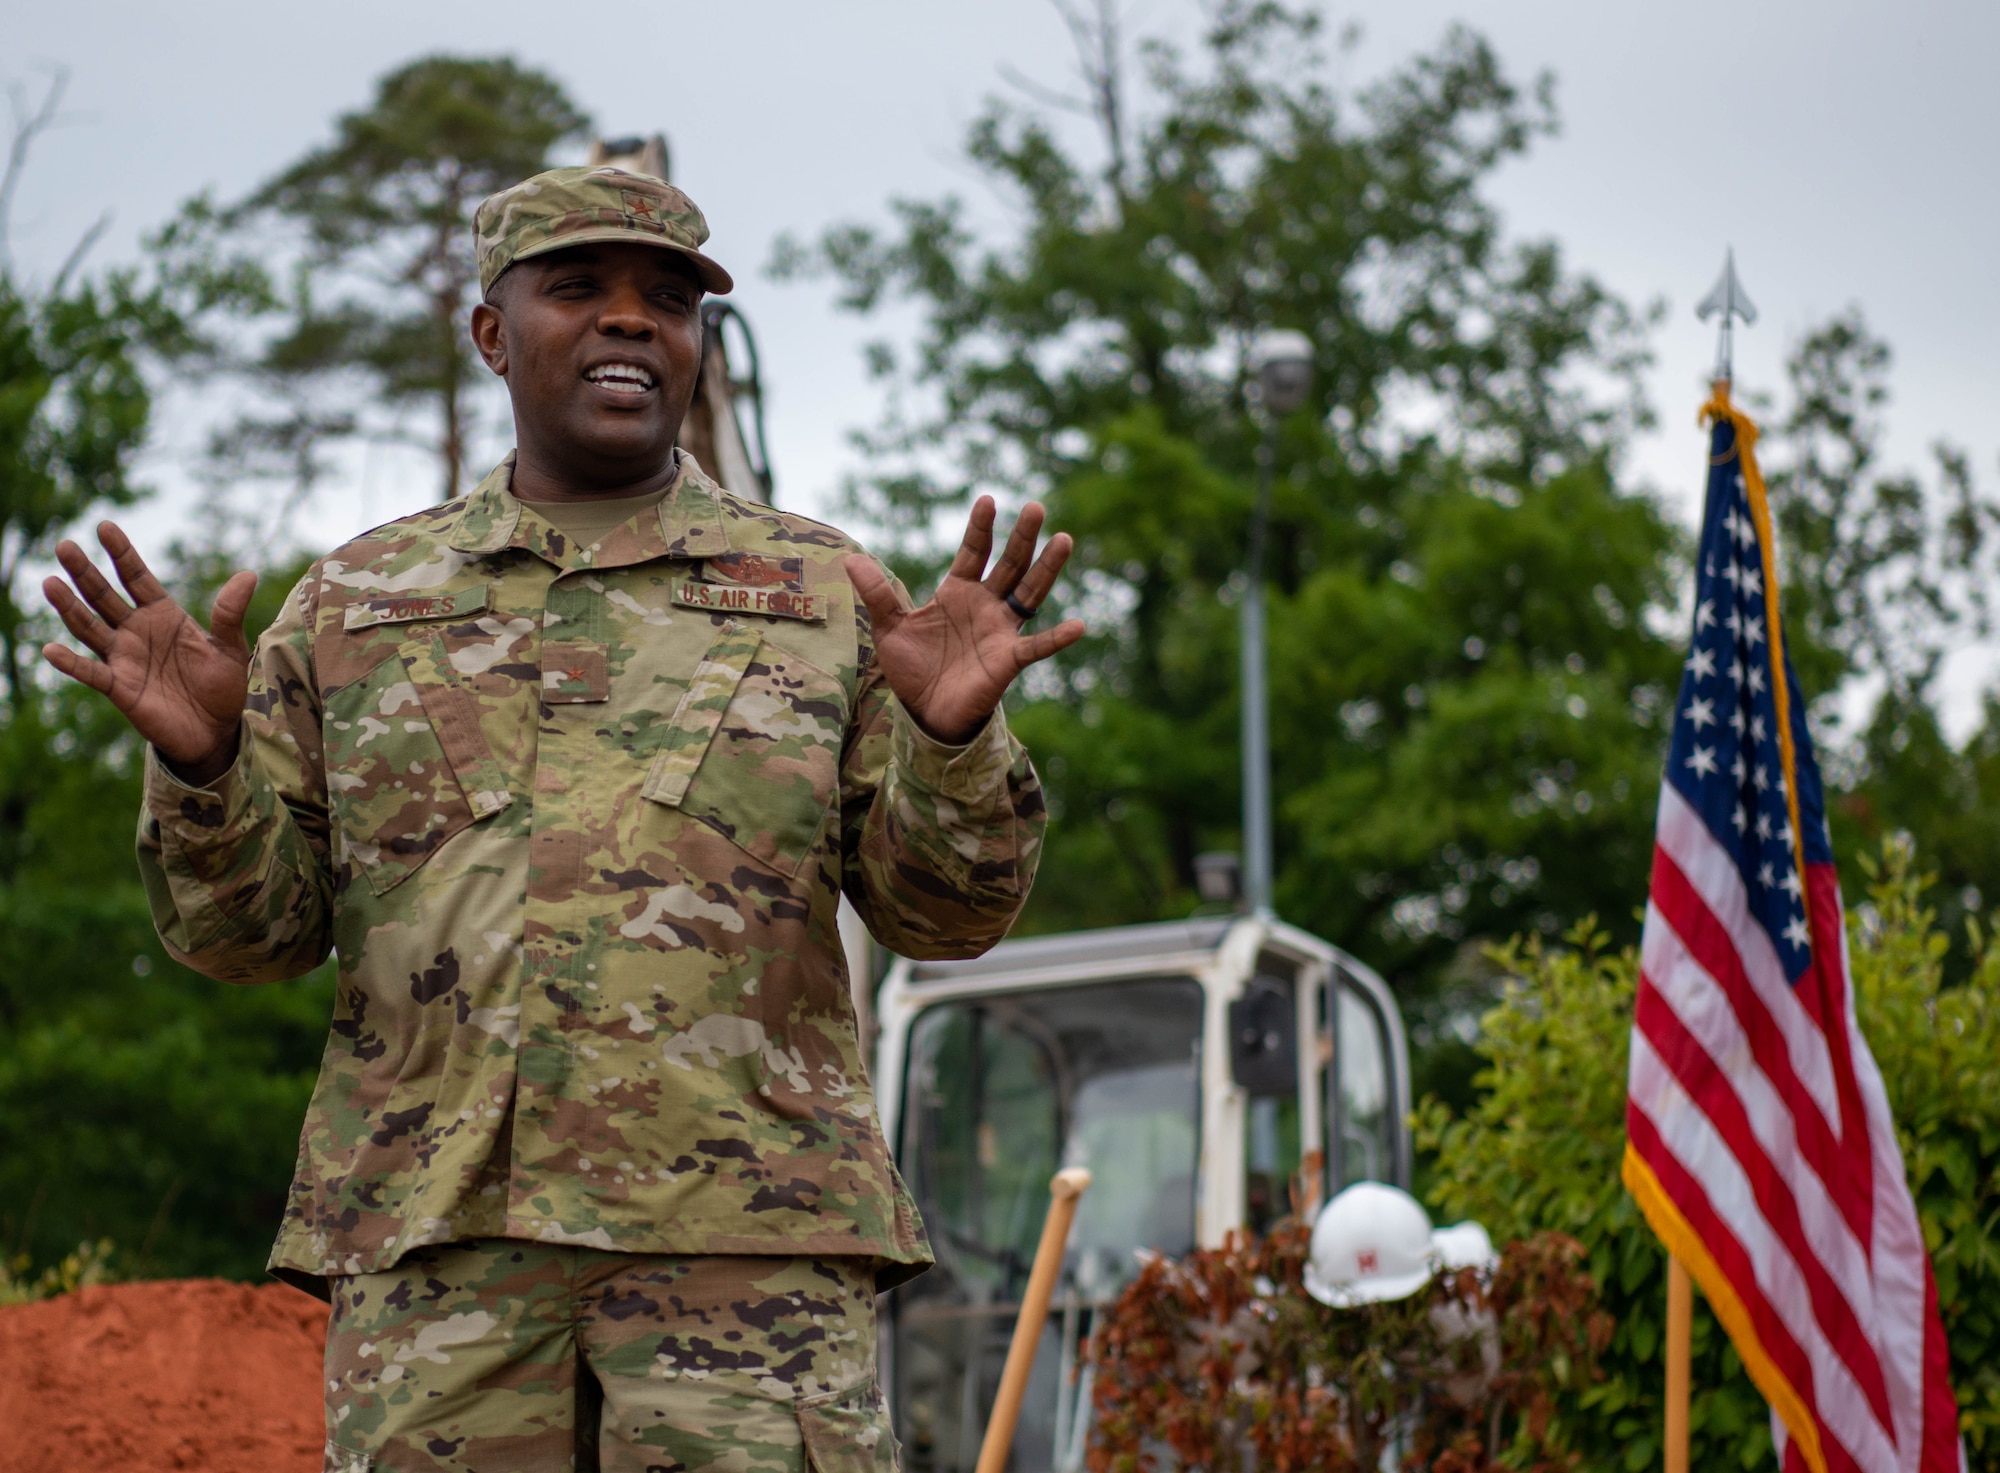 U.S. Air Force Brig. Gen. Otis C. Jones, 86th Airlift Wing commander, explains the significance of the Global Gateway mission during the Gateway to Europe traffic circle ground breaking ceremony at Ramstein Air Base, Germany, Aug. 15, 2022.